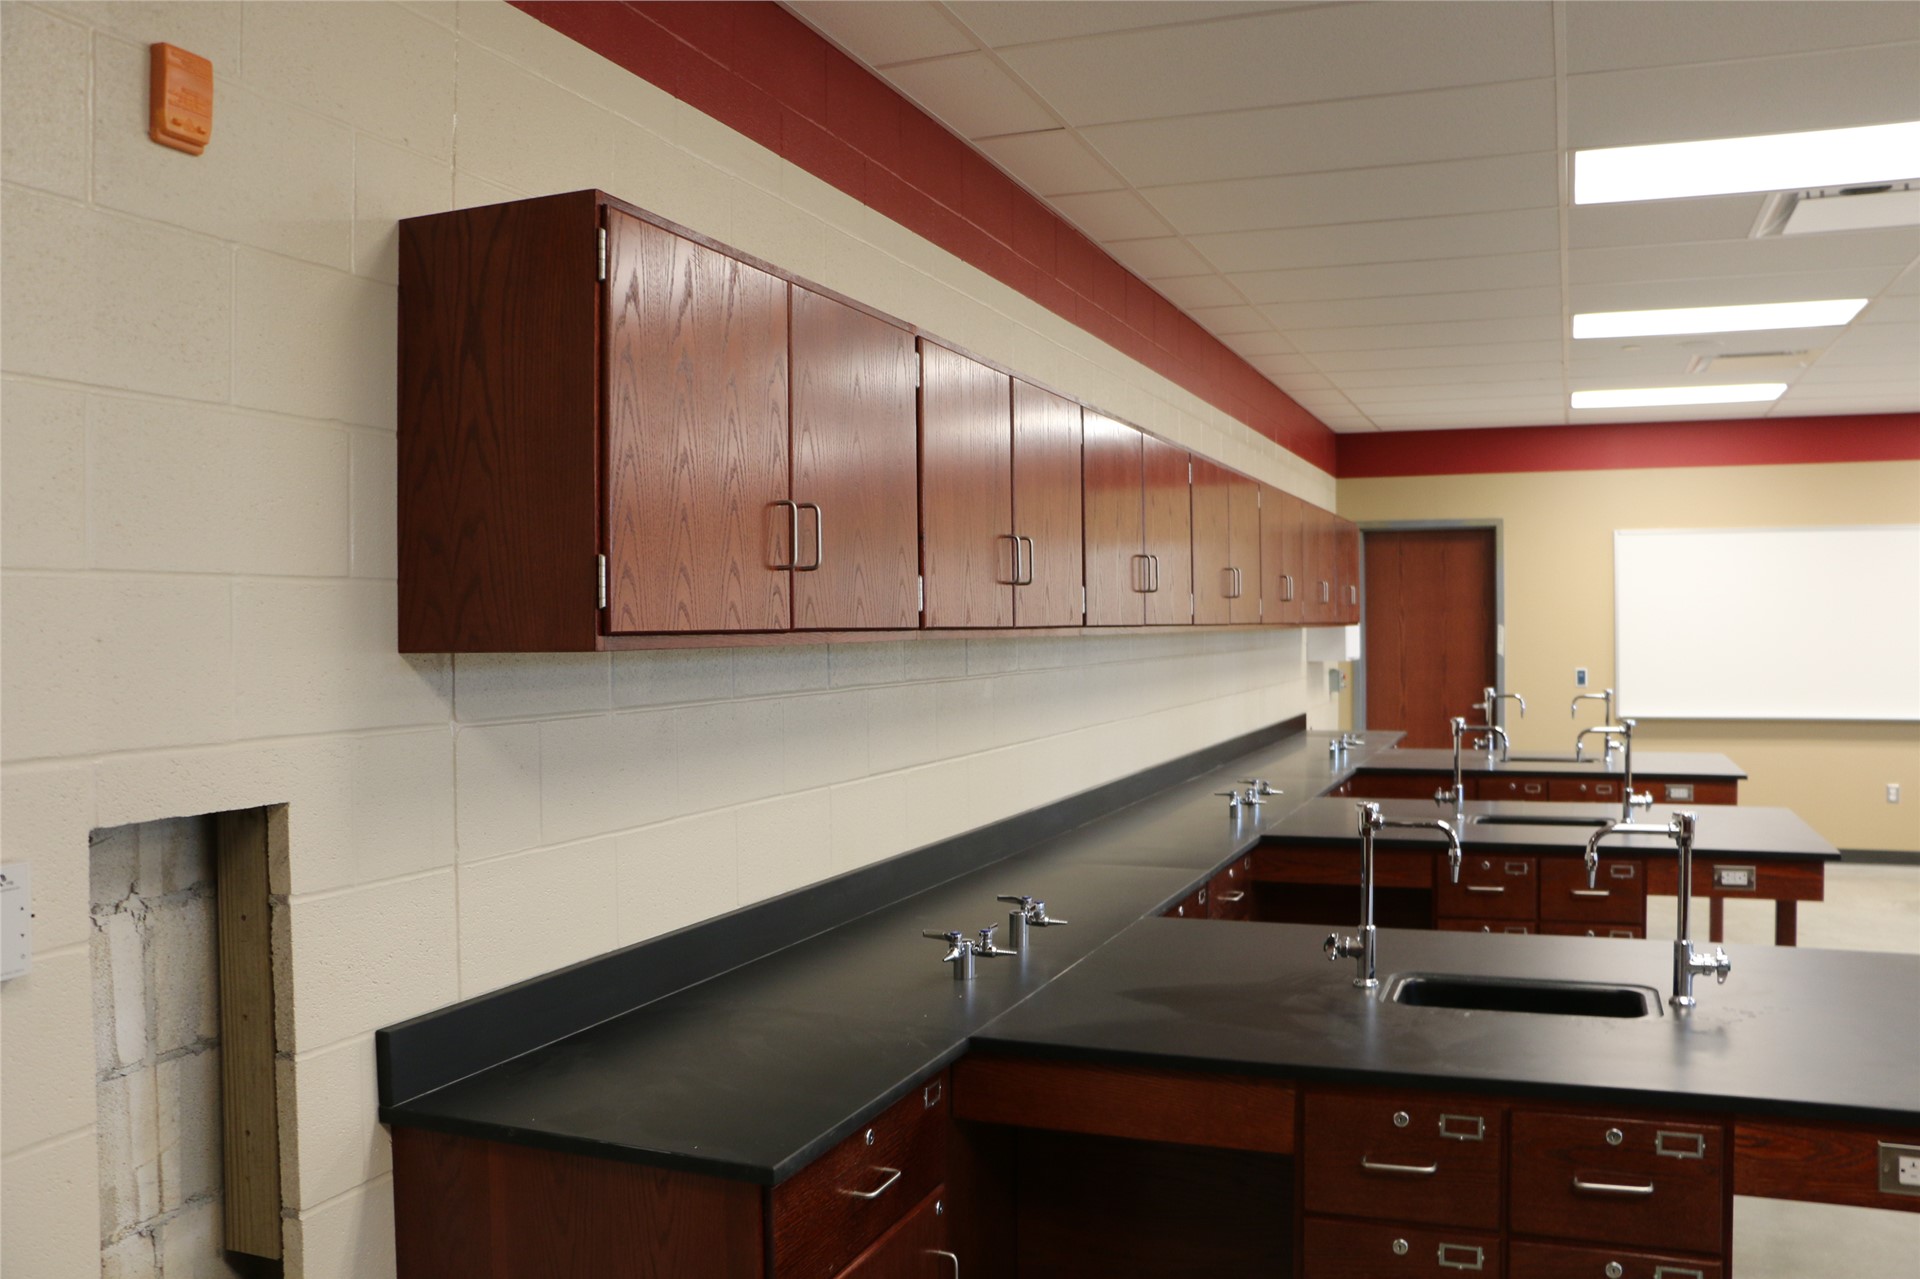 Typical Science Classroom/Lab - Interior Wall